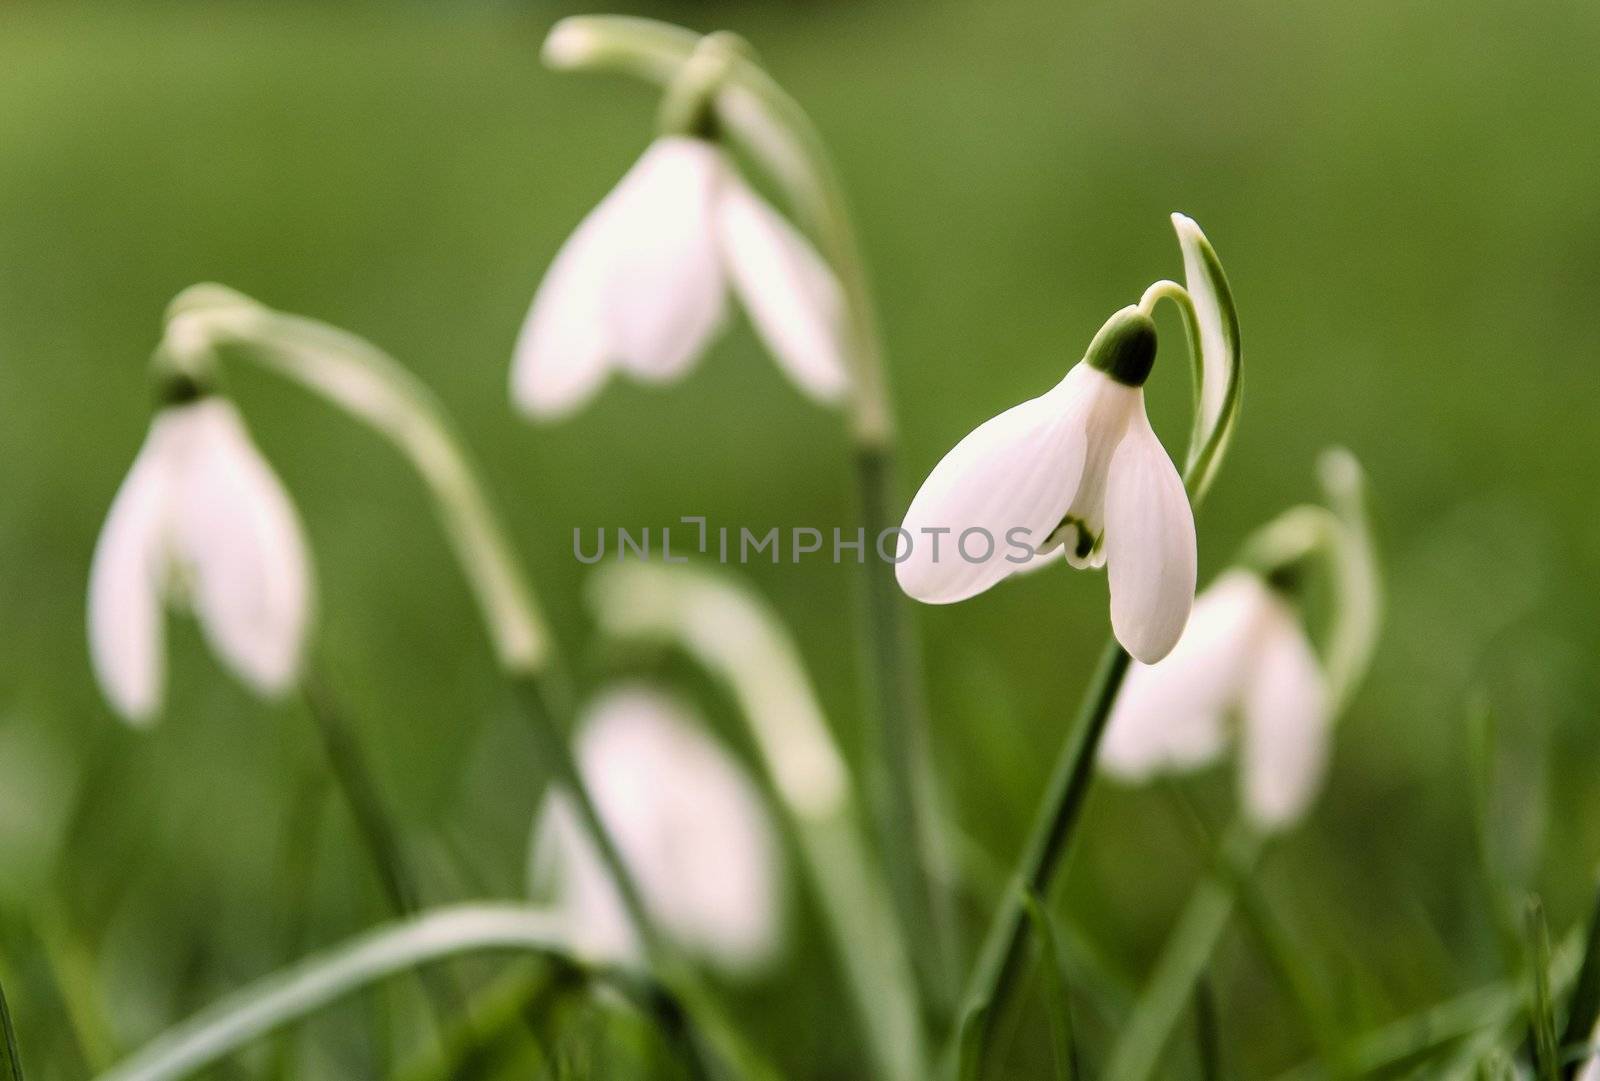 Pretty Snowdrop flowers are one of the first flowers to appear in late winter / early spring